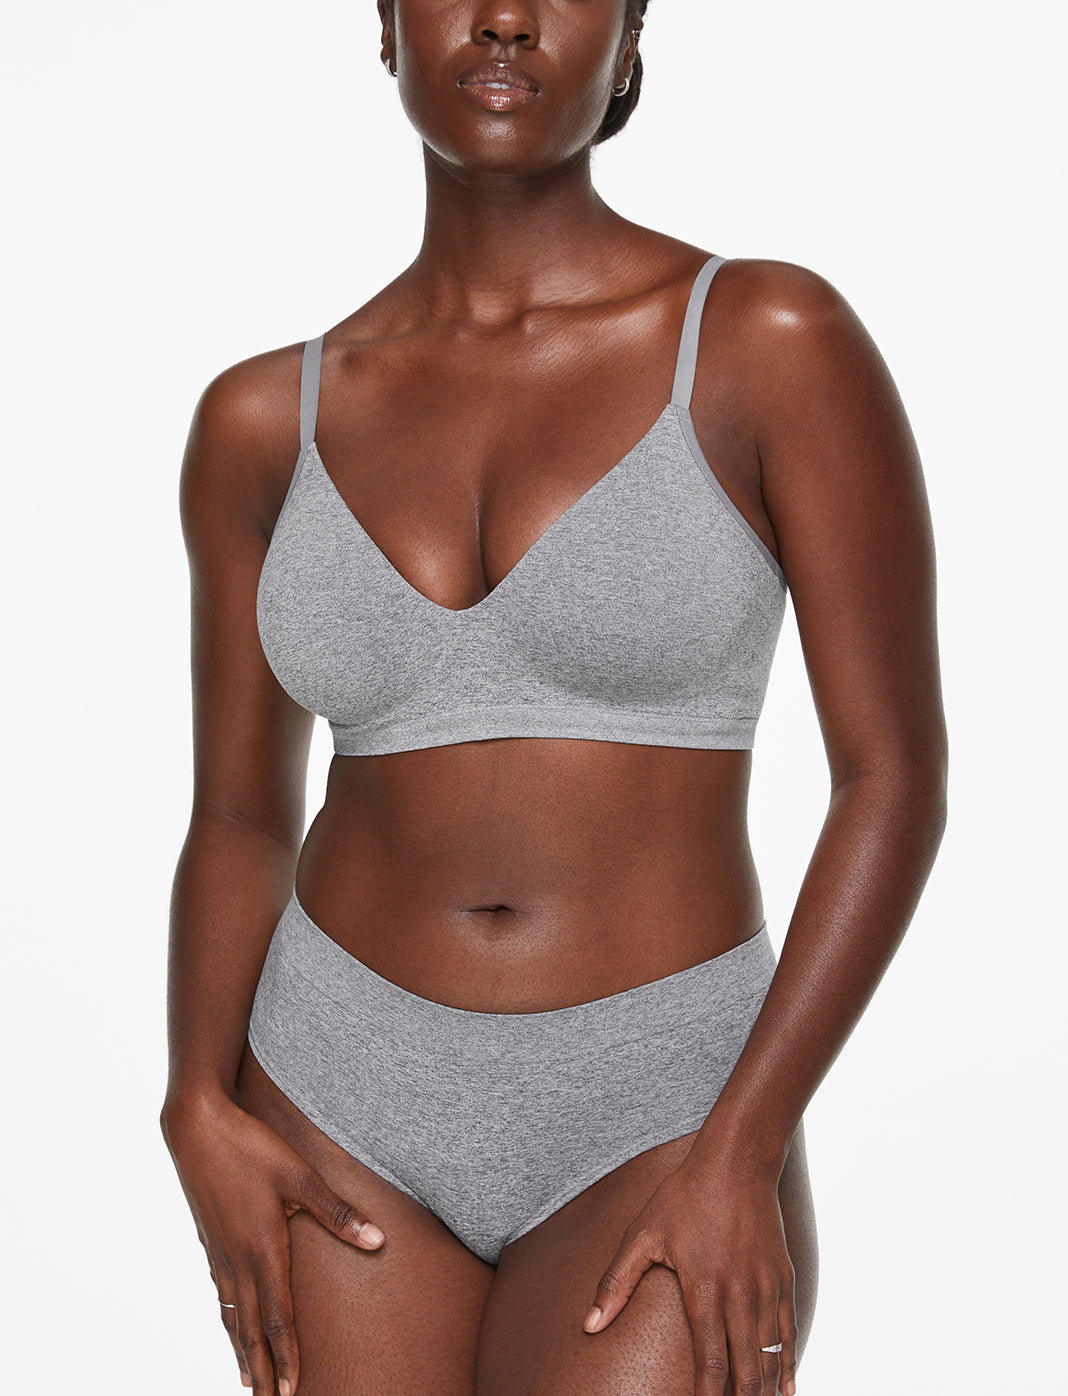 ThirdLove knows bras, and their new Form 360 bra is a game-changer